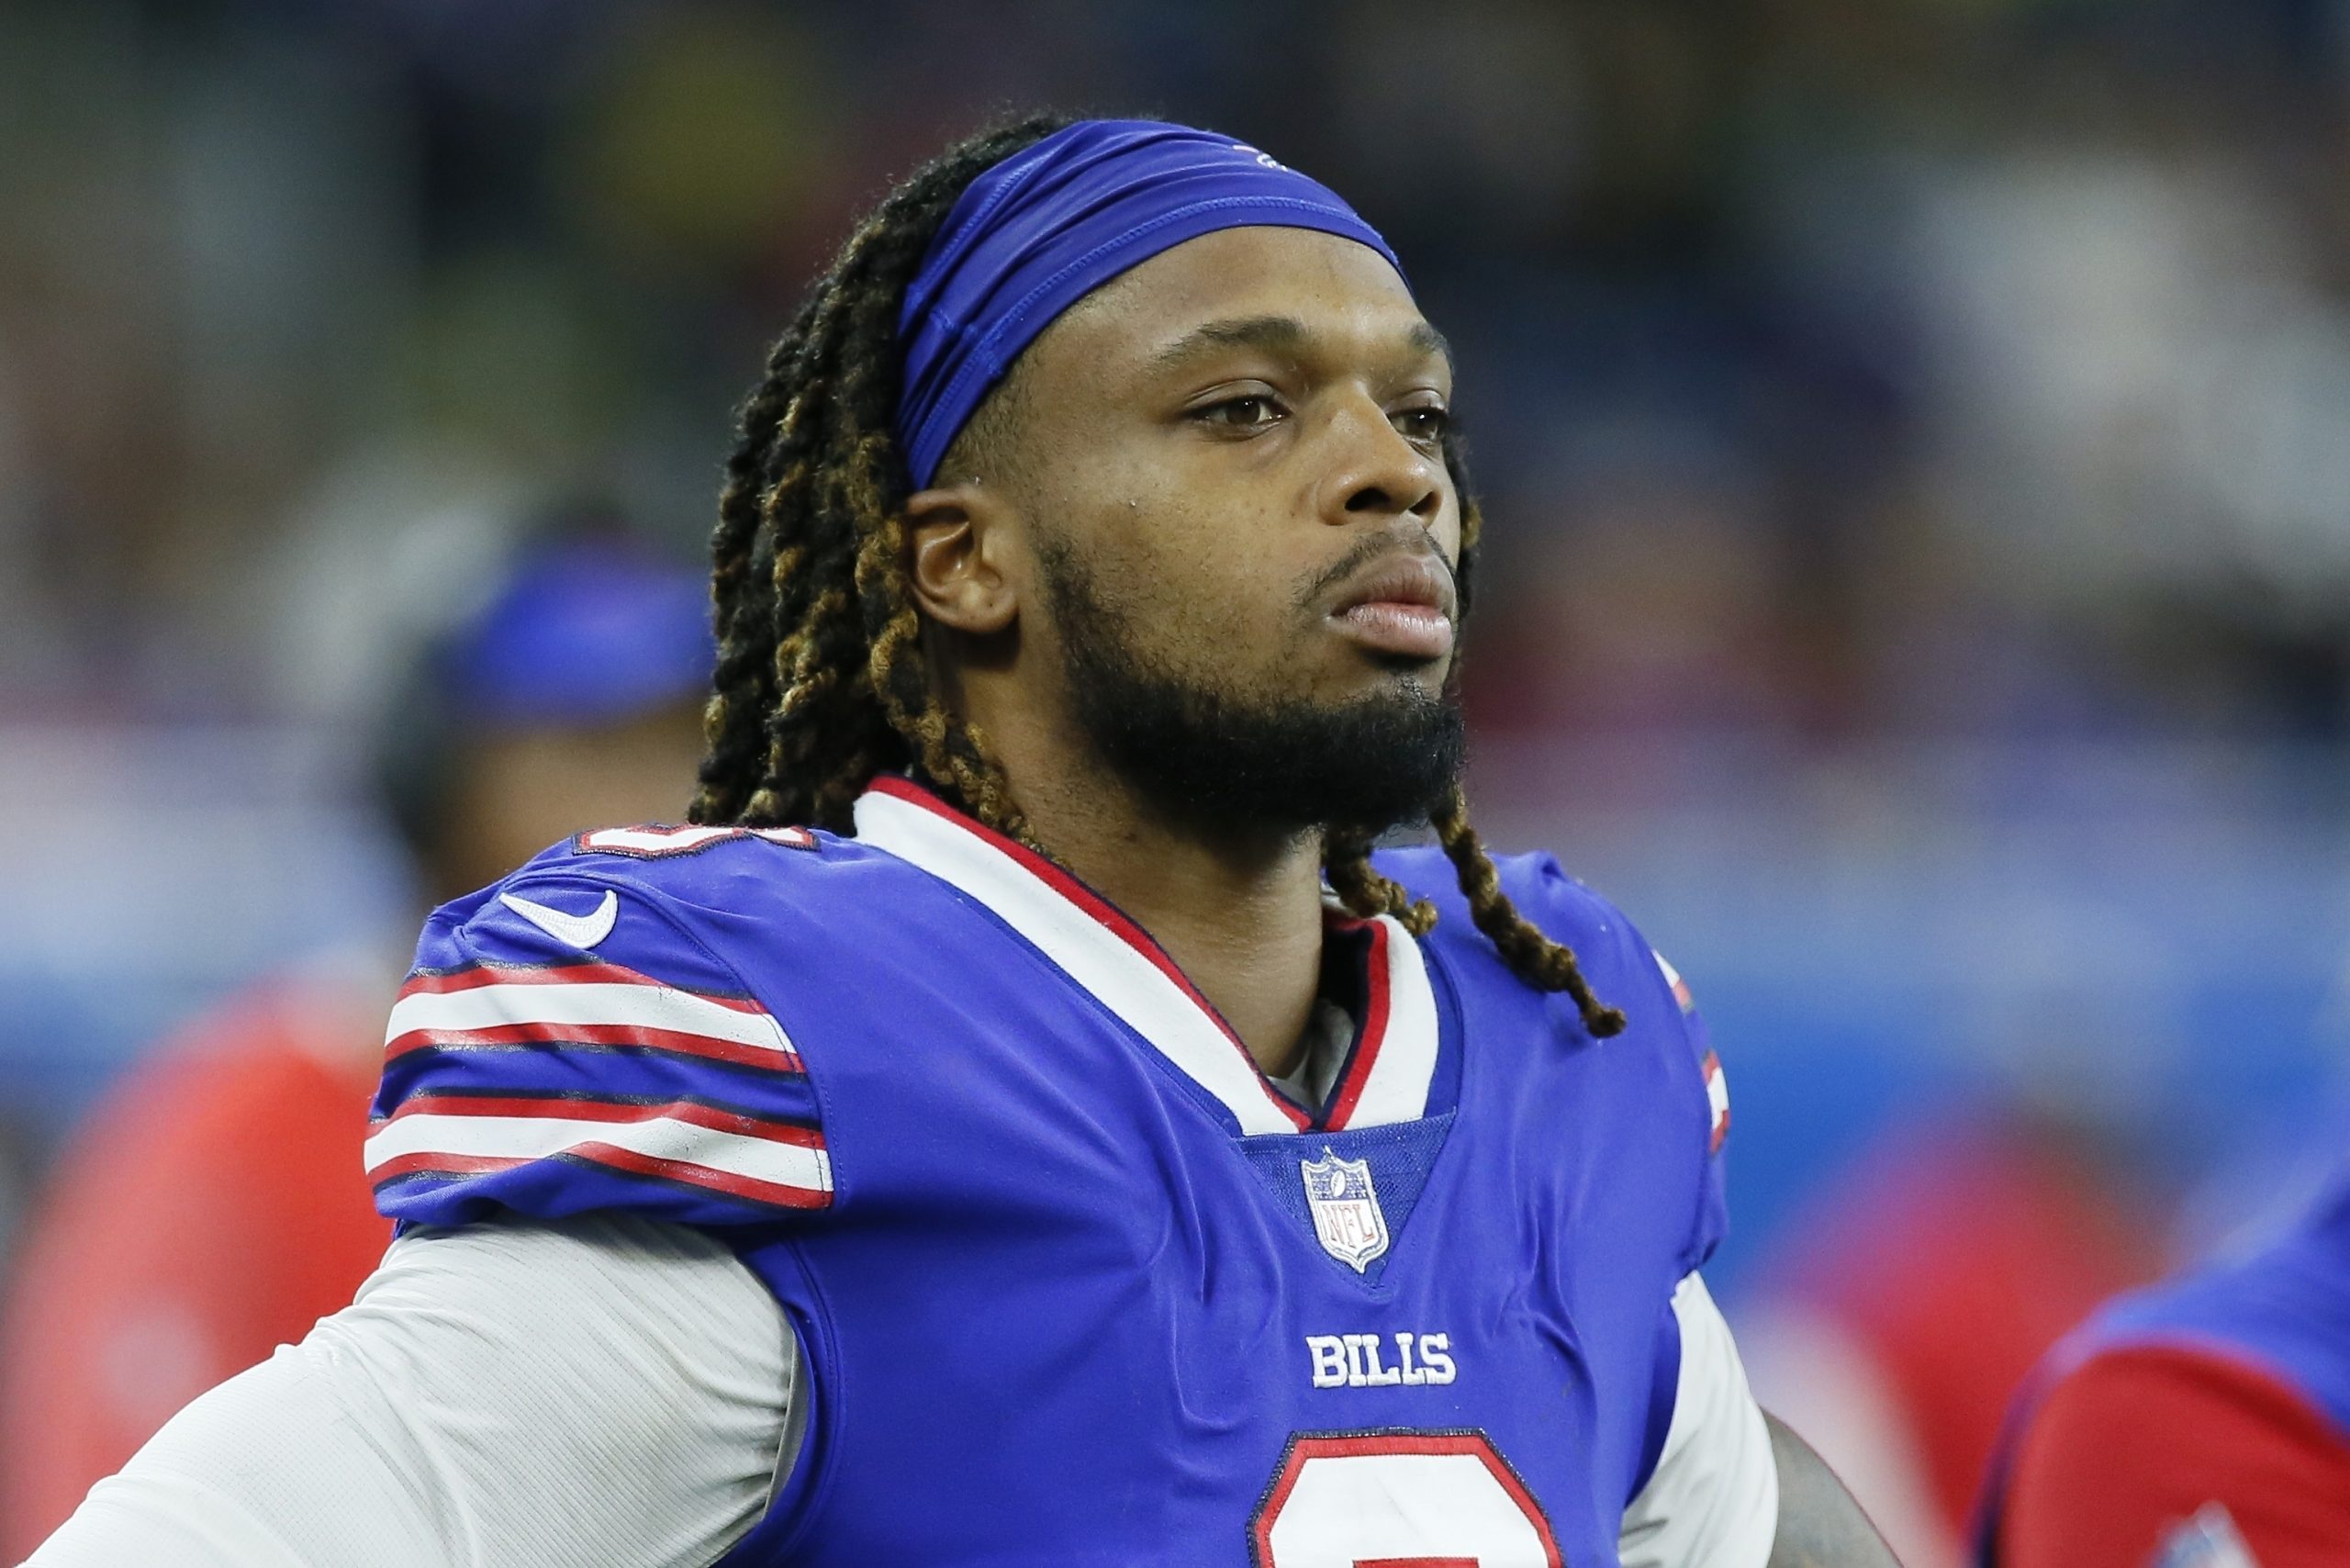 Bills' Player Damar Hamlin is Going to Play on Sunday, Which is the First Time Since He Had a Serious Heart Problem